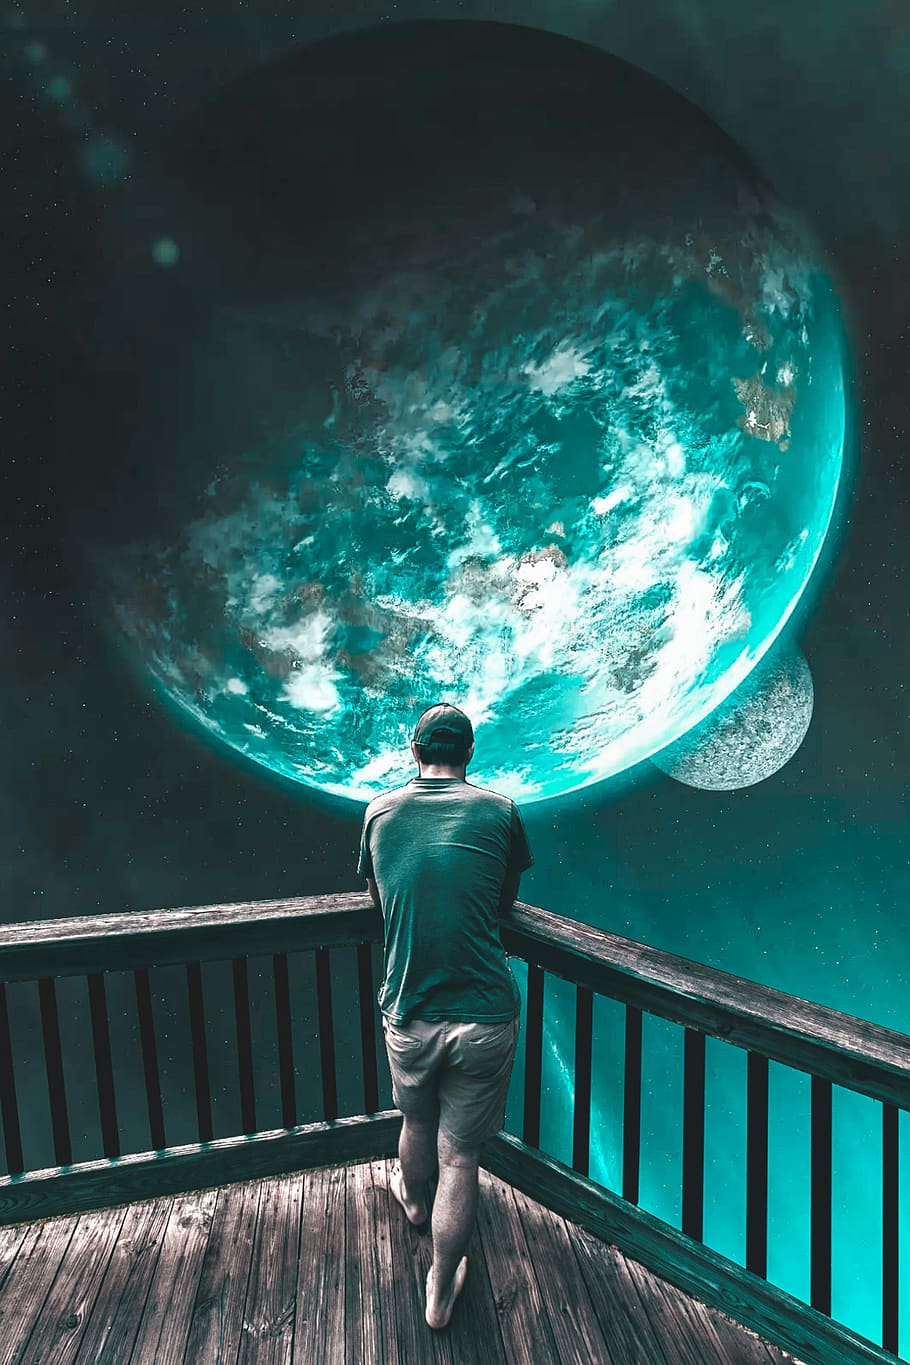 planet, man, balcony, fantasy, photoshop, one person, real people, railing, standing, rear view